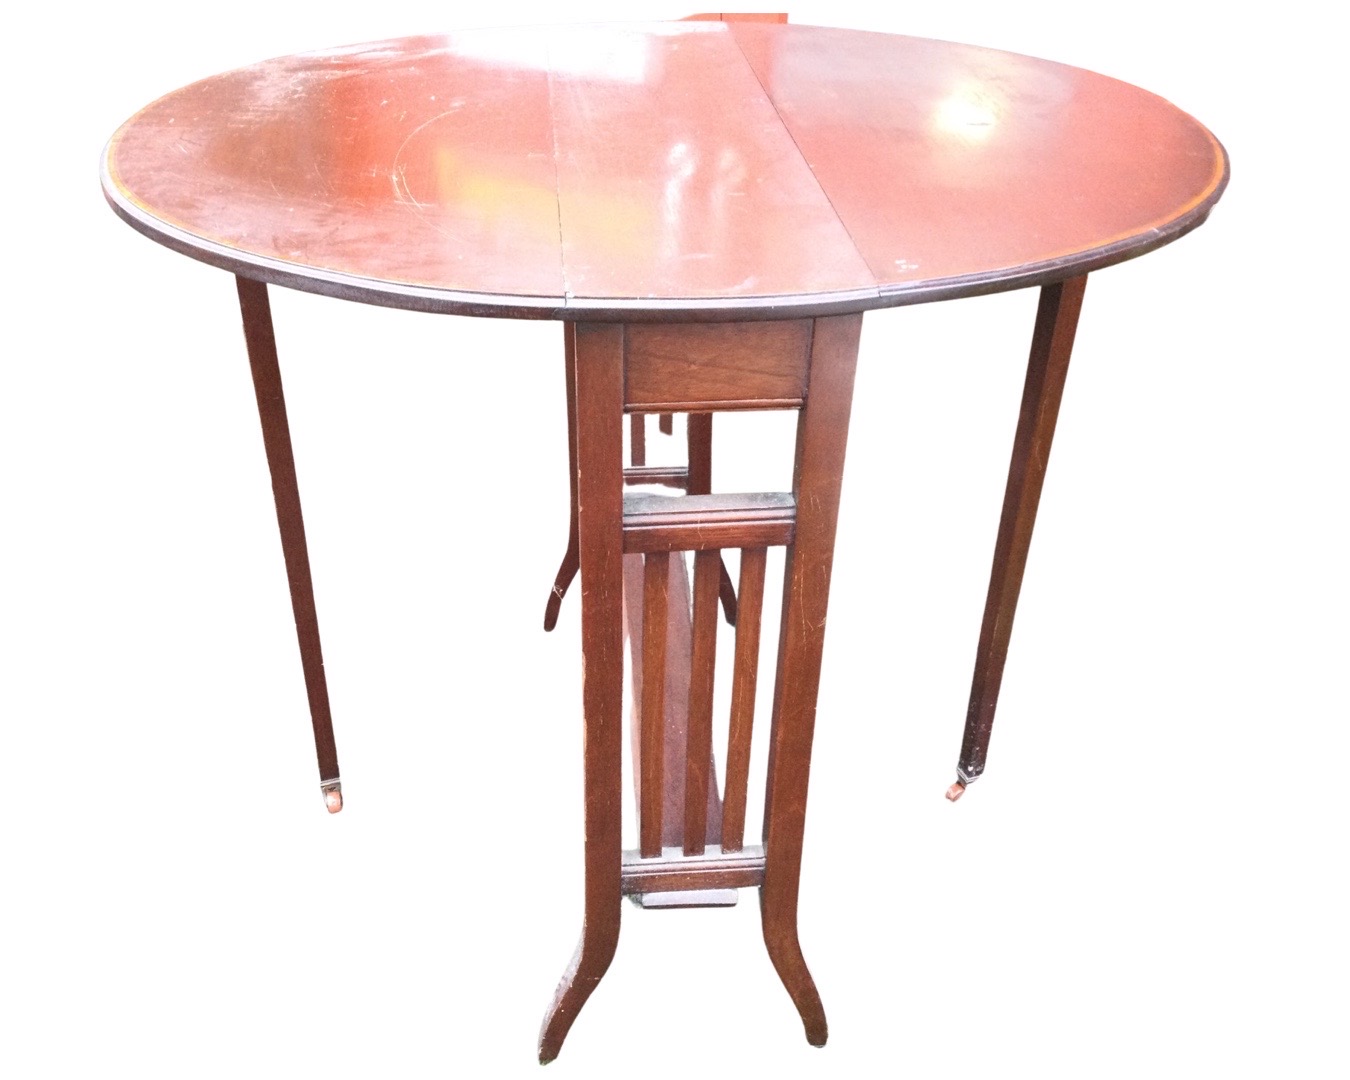 An Edwardian mahogany sutherland table with satinwood crossbanding to oval top, having drop-leaves